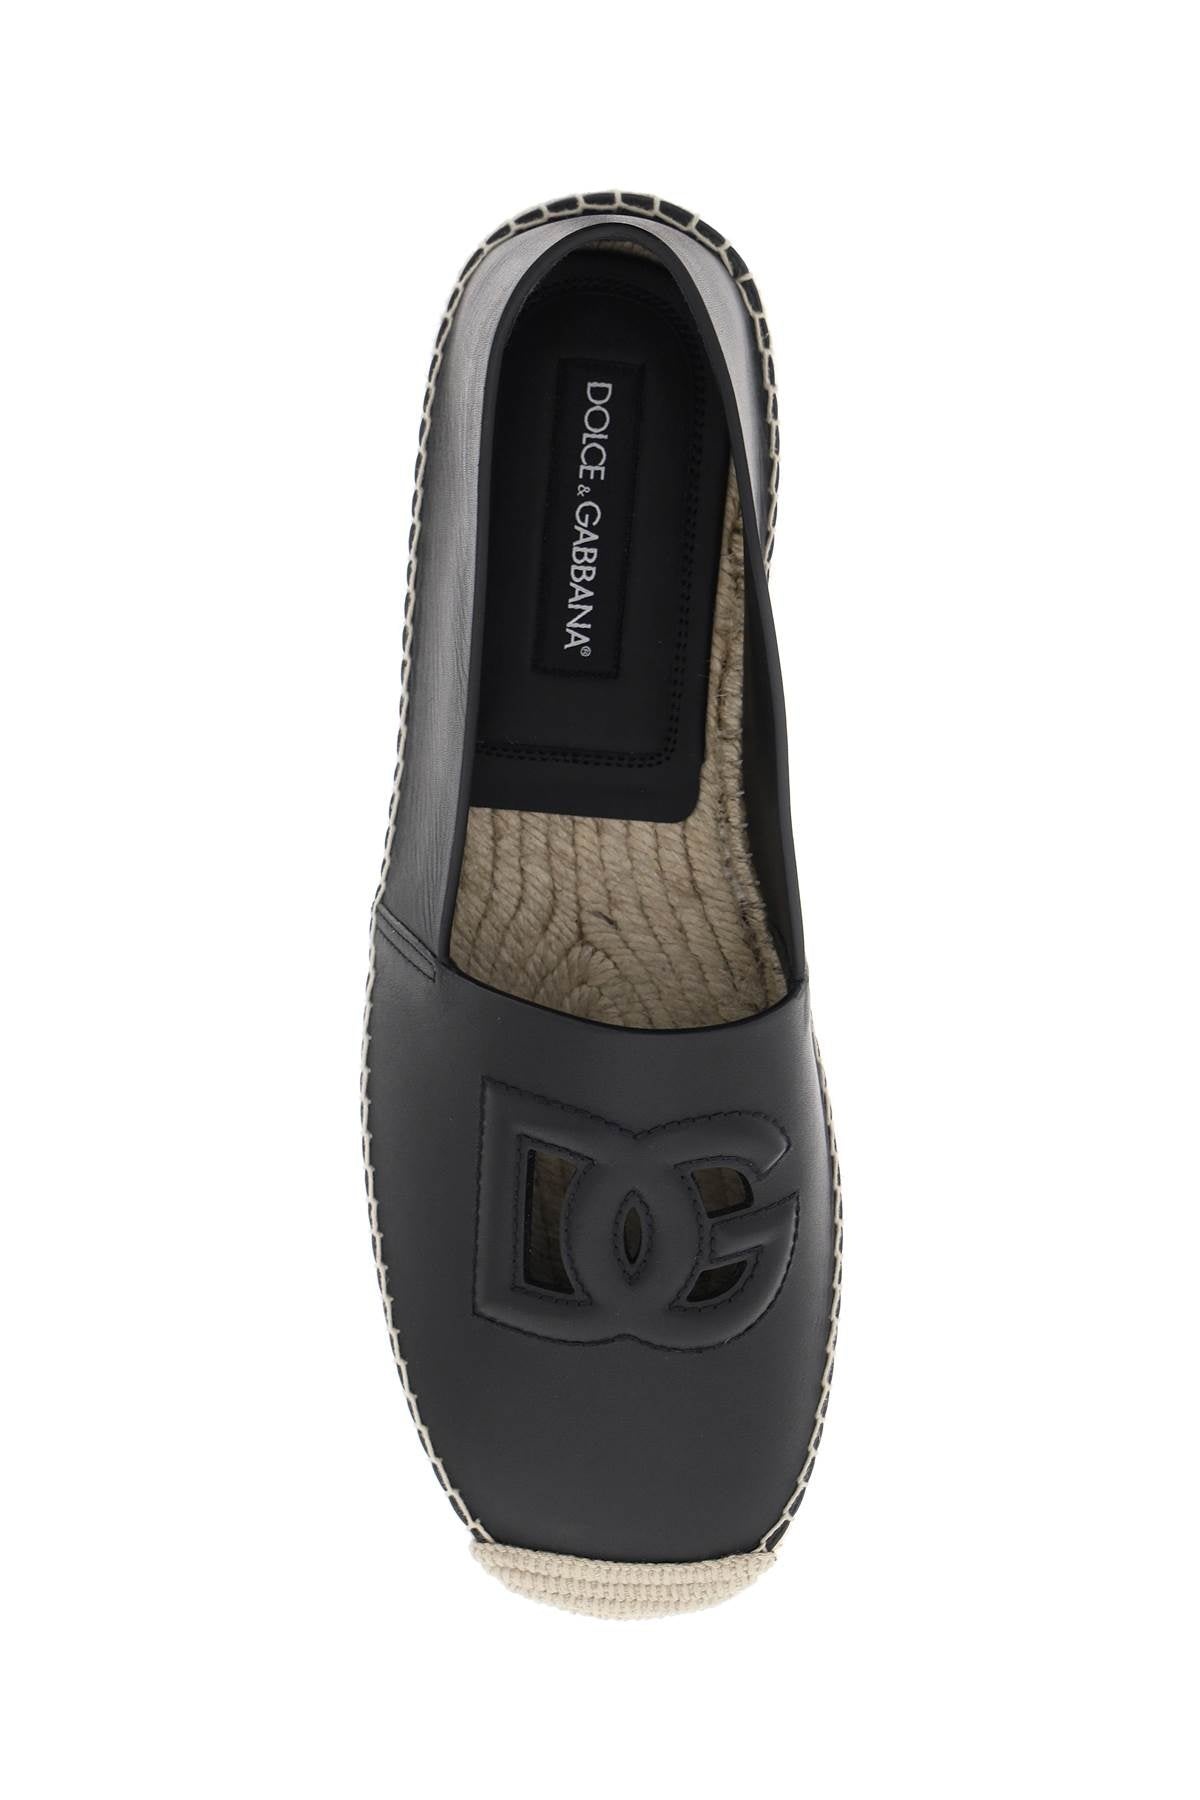 Dolce & Gabbana Leather Espadrilles With Dg Logo And Men - 2